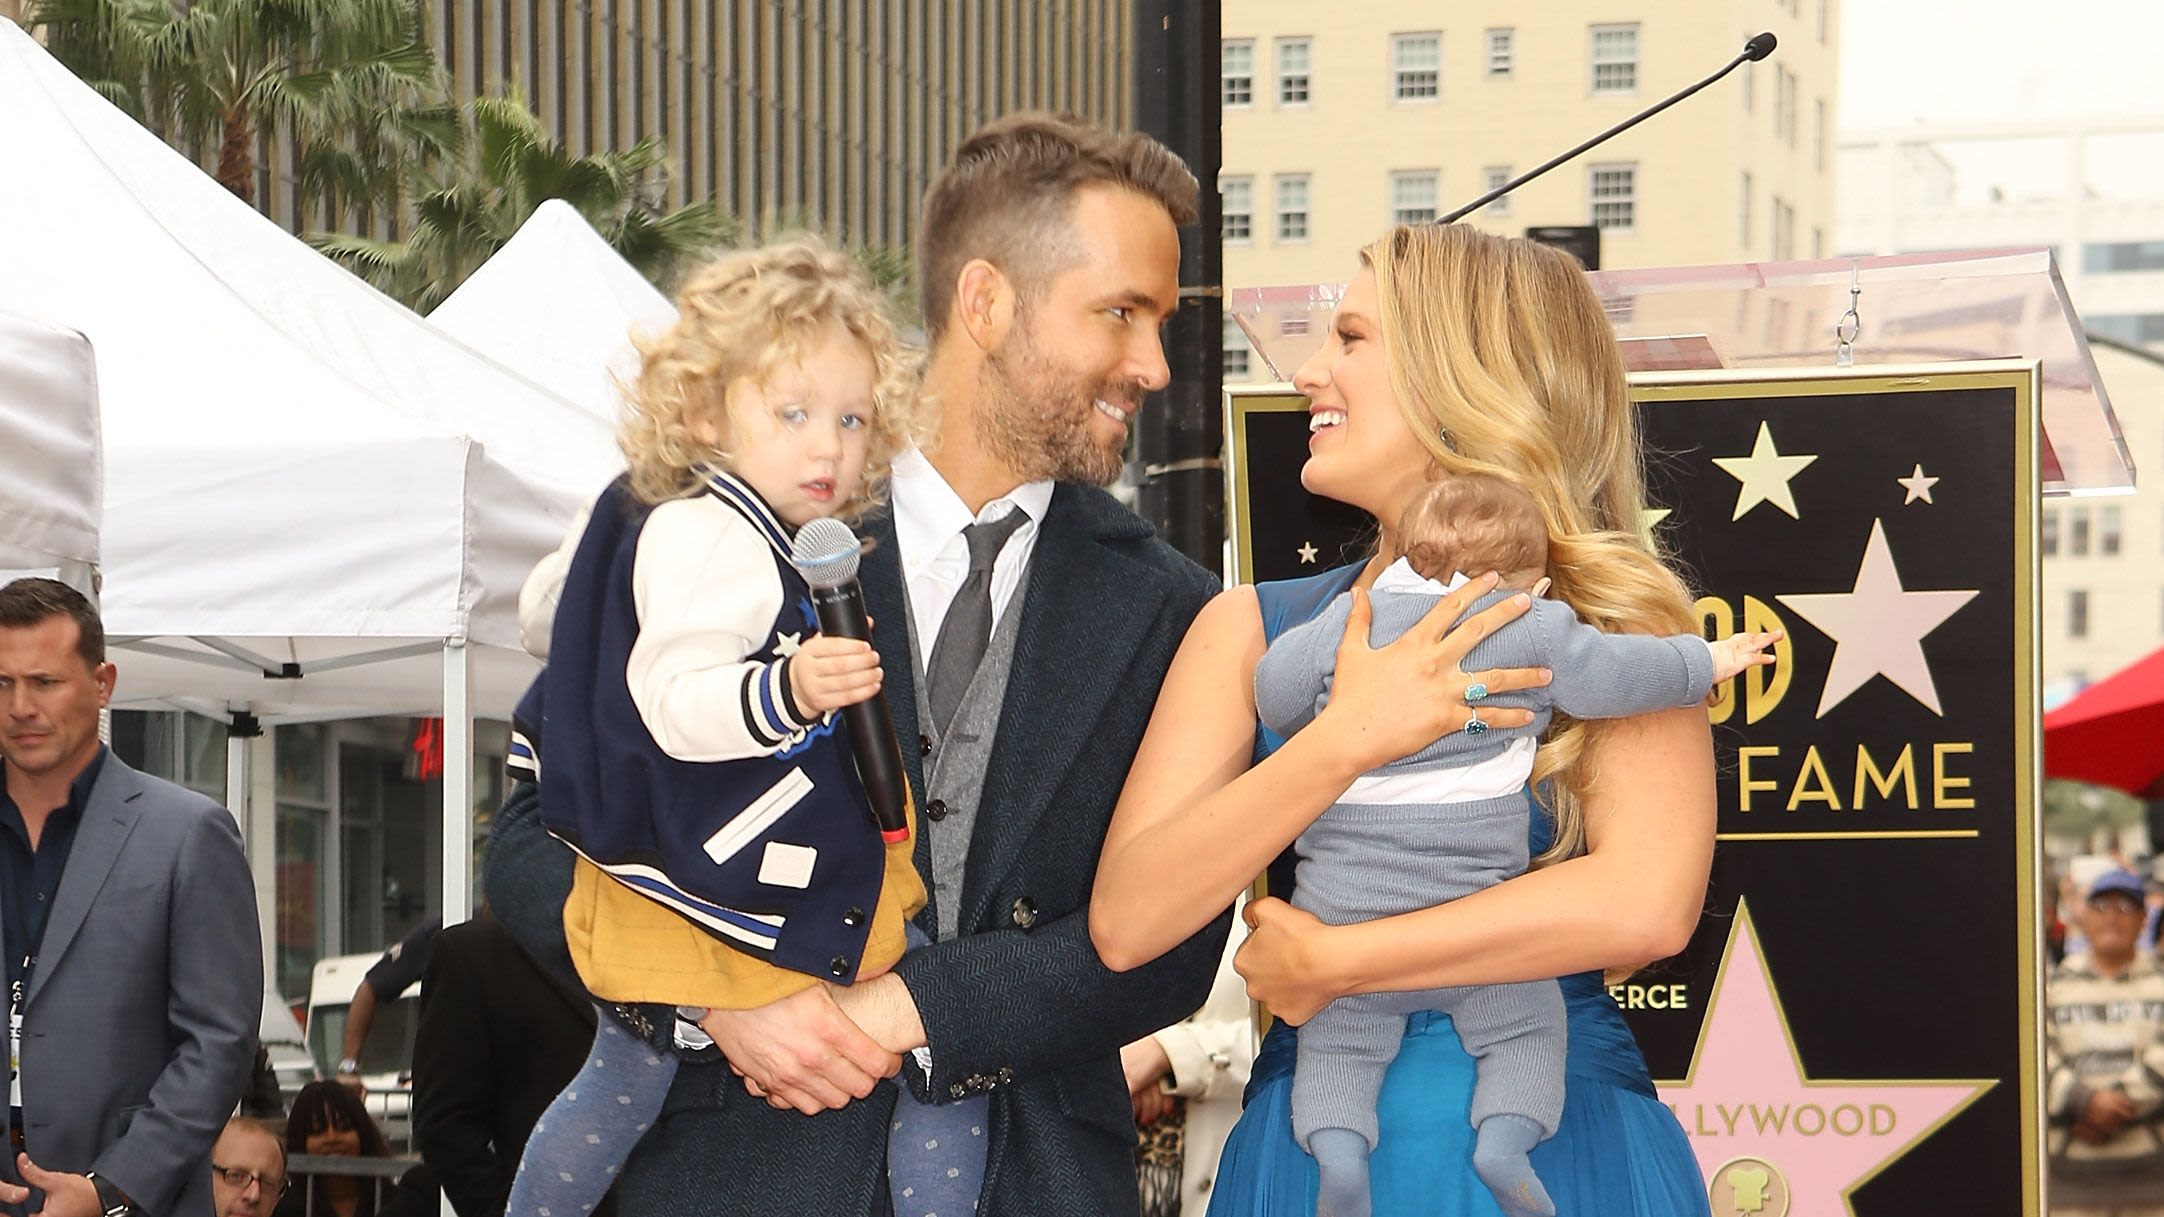 Ryan Reynolds Says He Wants "As Many" Kids "As Possible" with Blake Lively